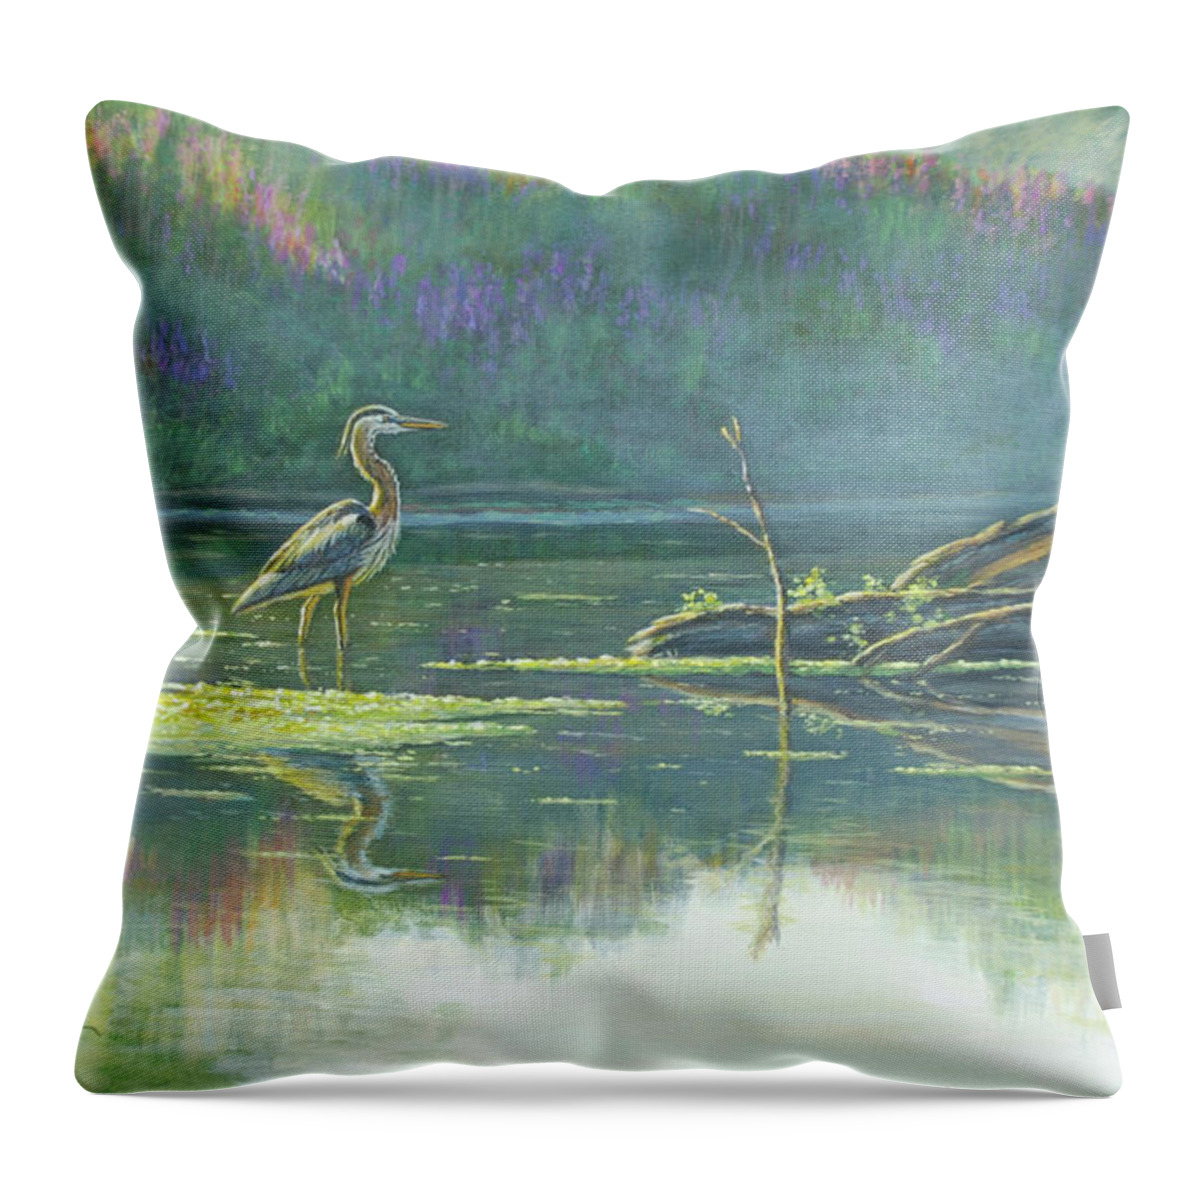 Wildlife Throw Pillow featuring the painting Solitary Hunter by Bruce Dumas